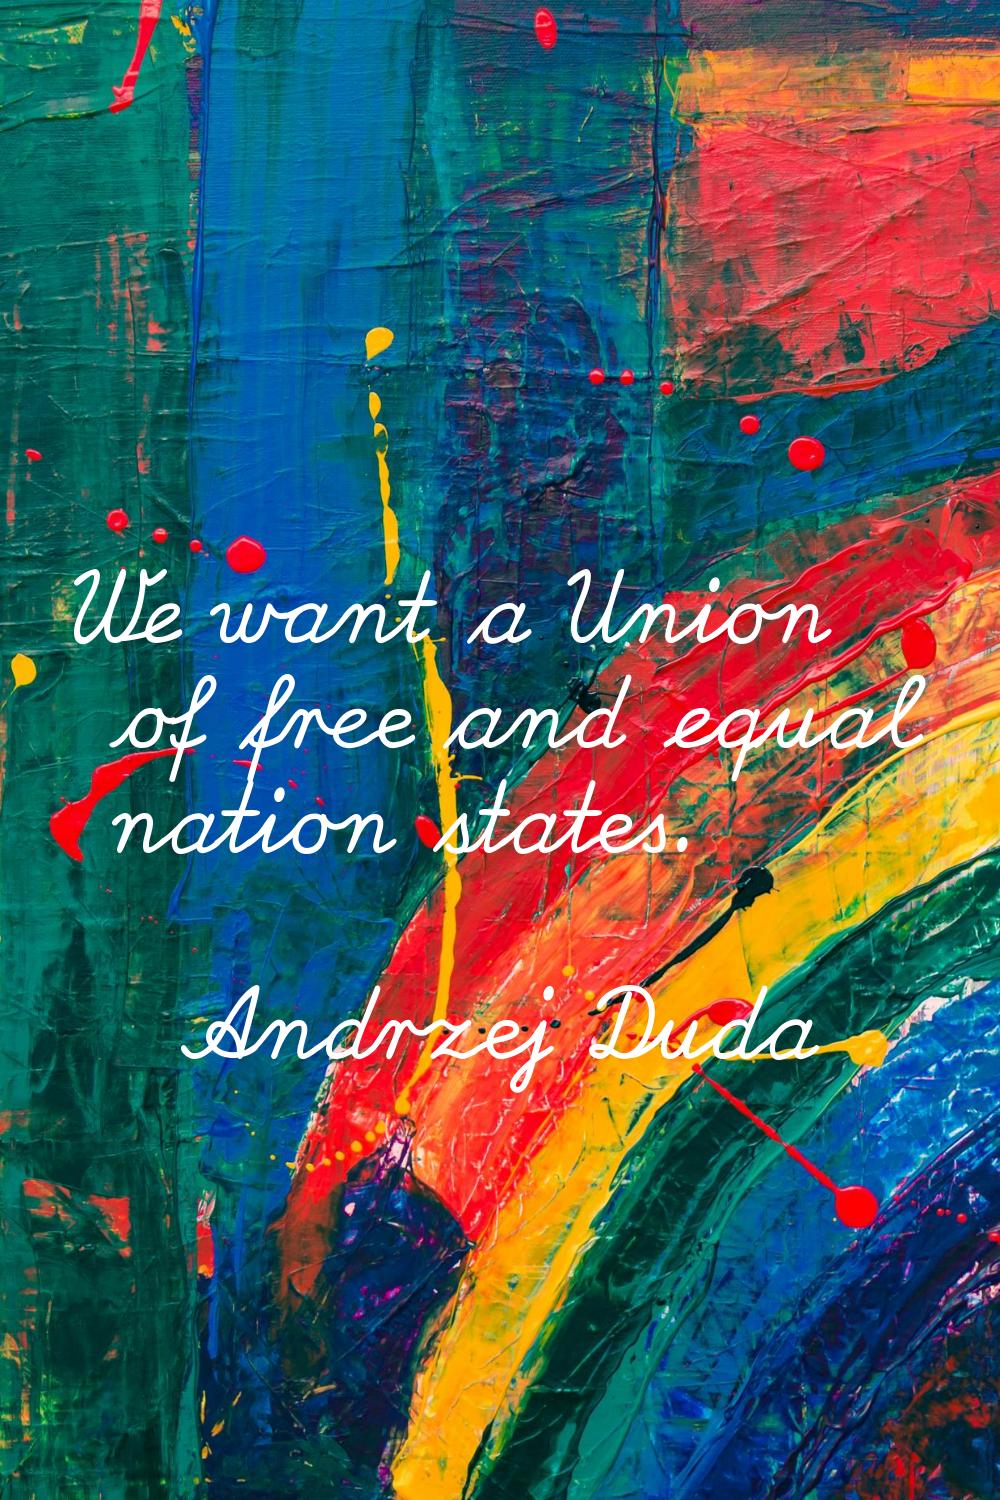 We want a Union of free and equal nation states.